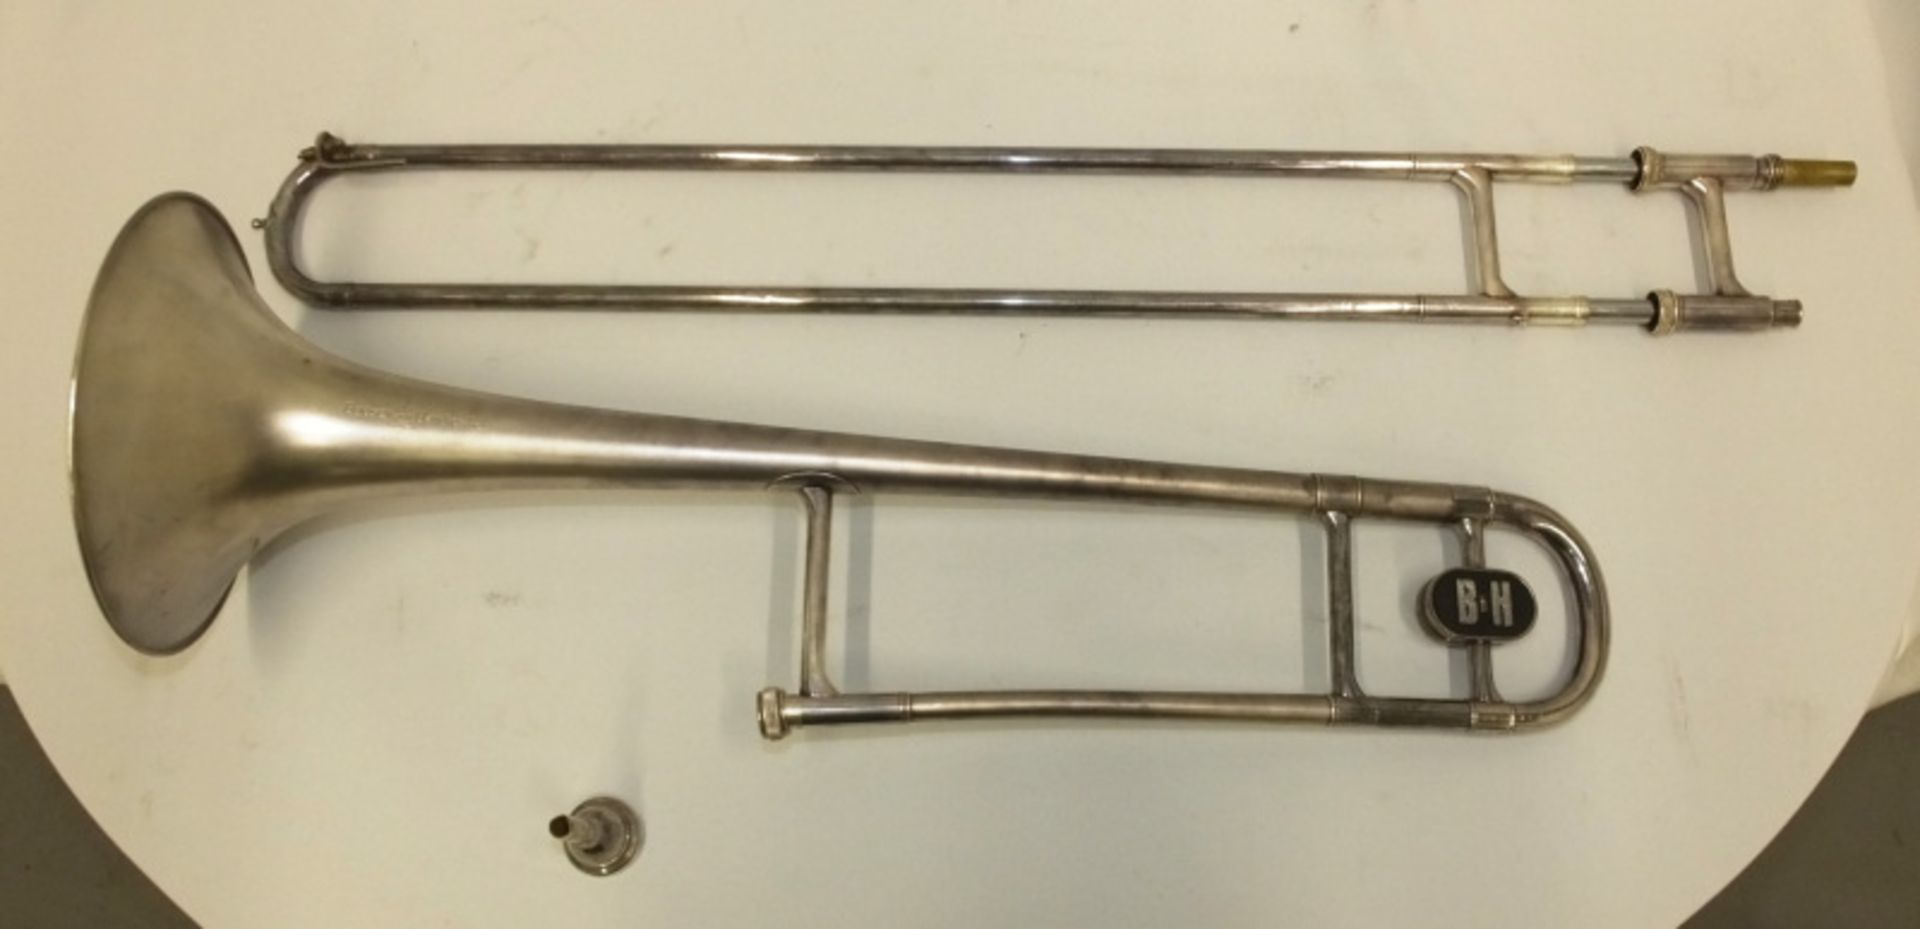 Boosey & Hawkes 636 Trombone in case - serial number 616559 - Please check photos carefully - Image 2 of 14